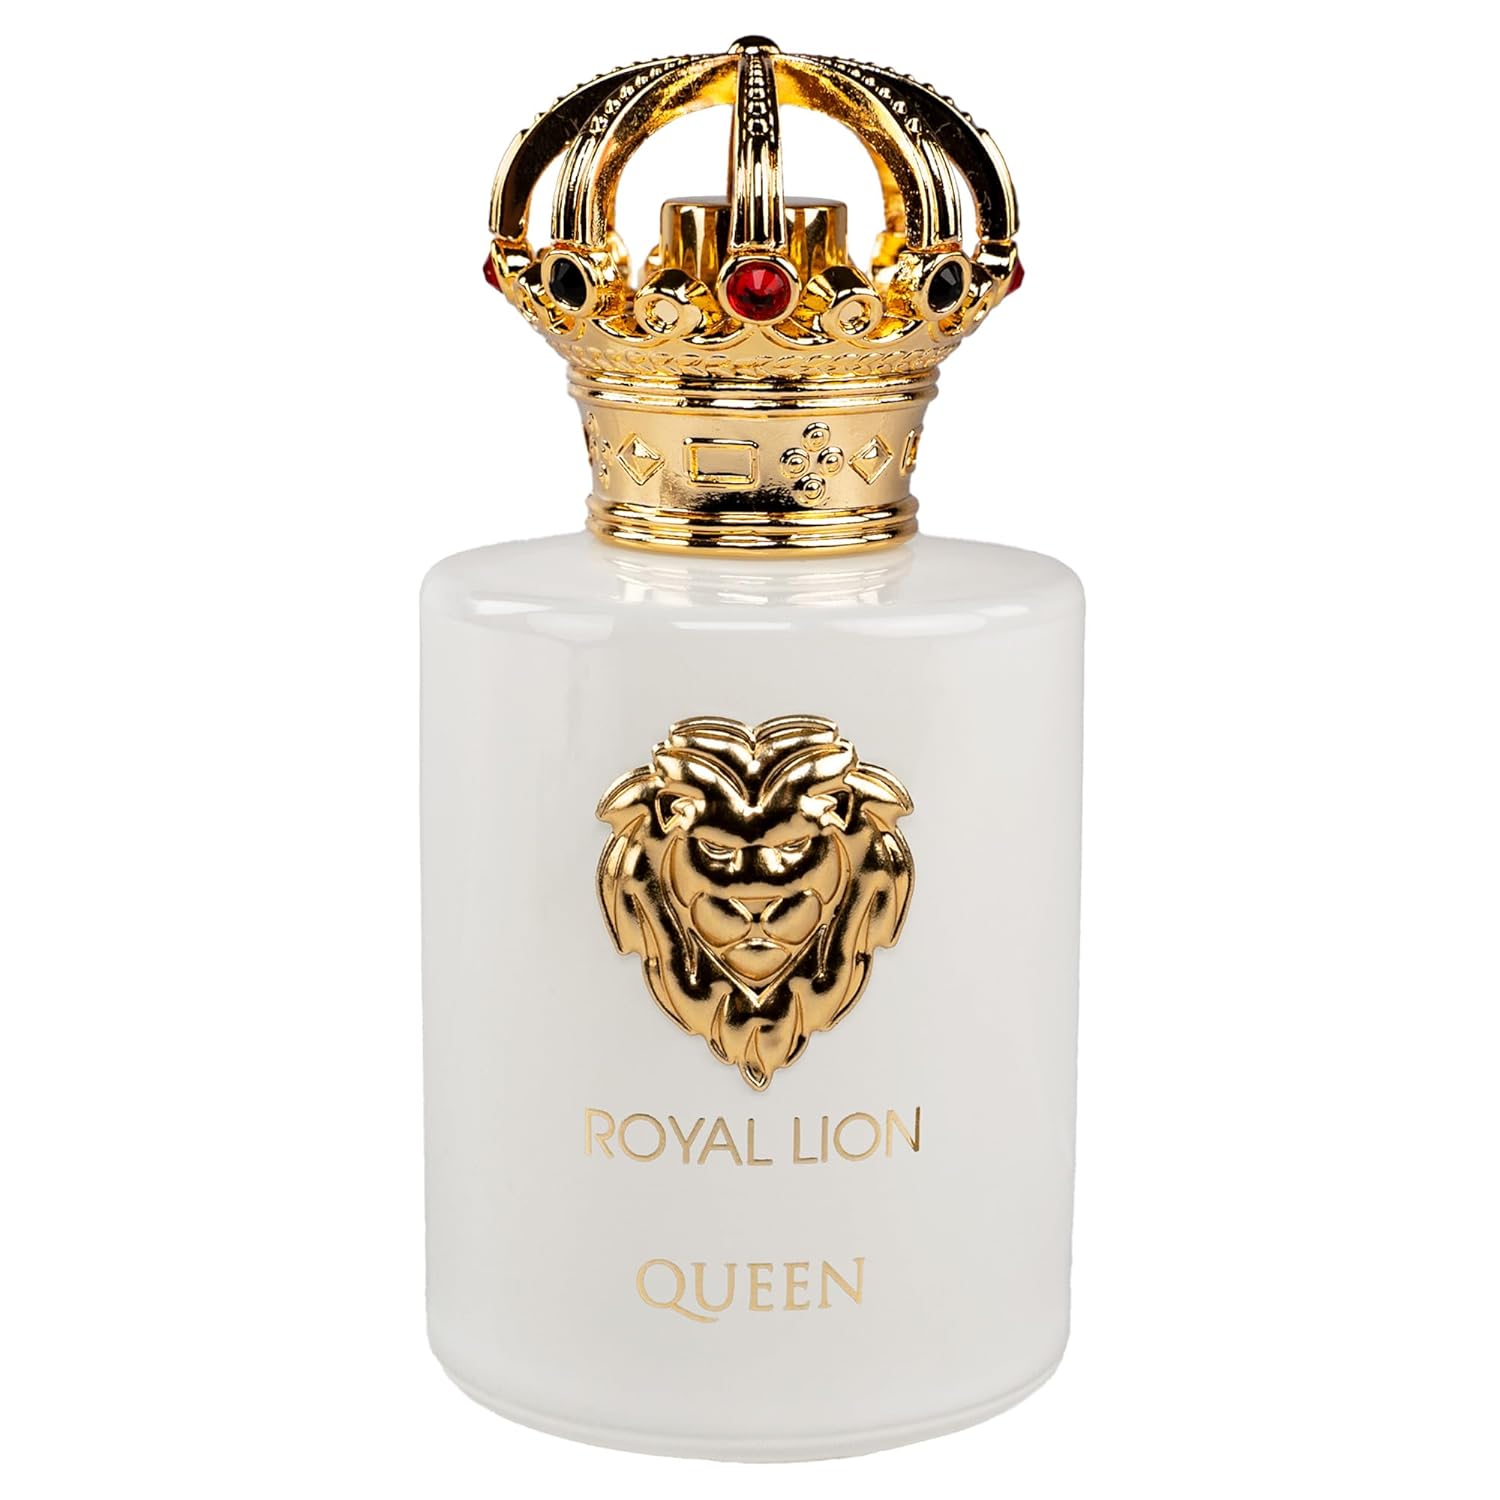 Royal Lion Queen Extrait de Parfum - A feminine amber fragrance with a Woody Floral Note - Experience Royal Elegance